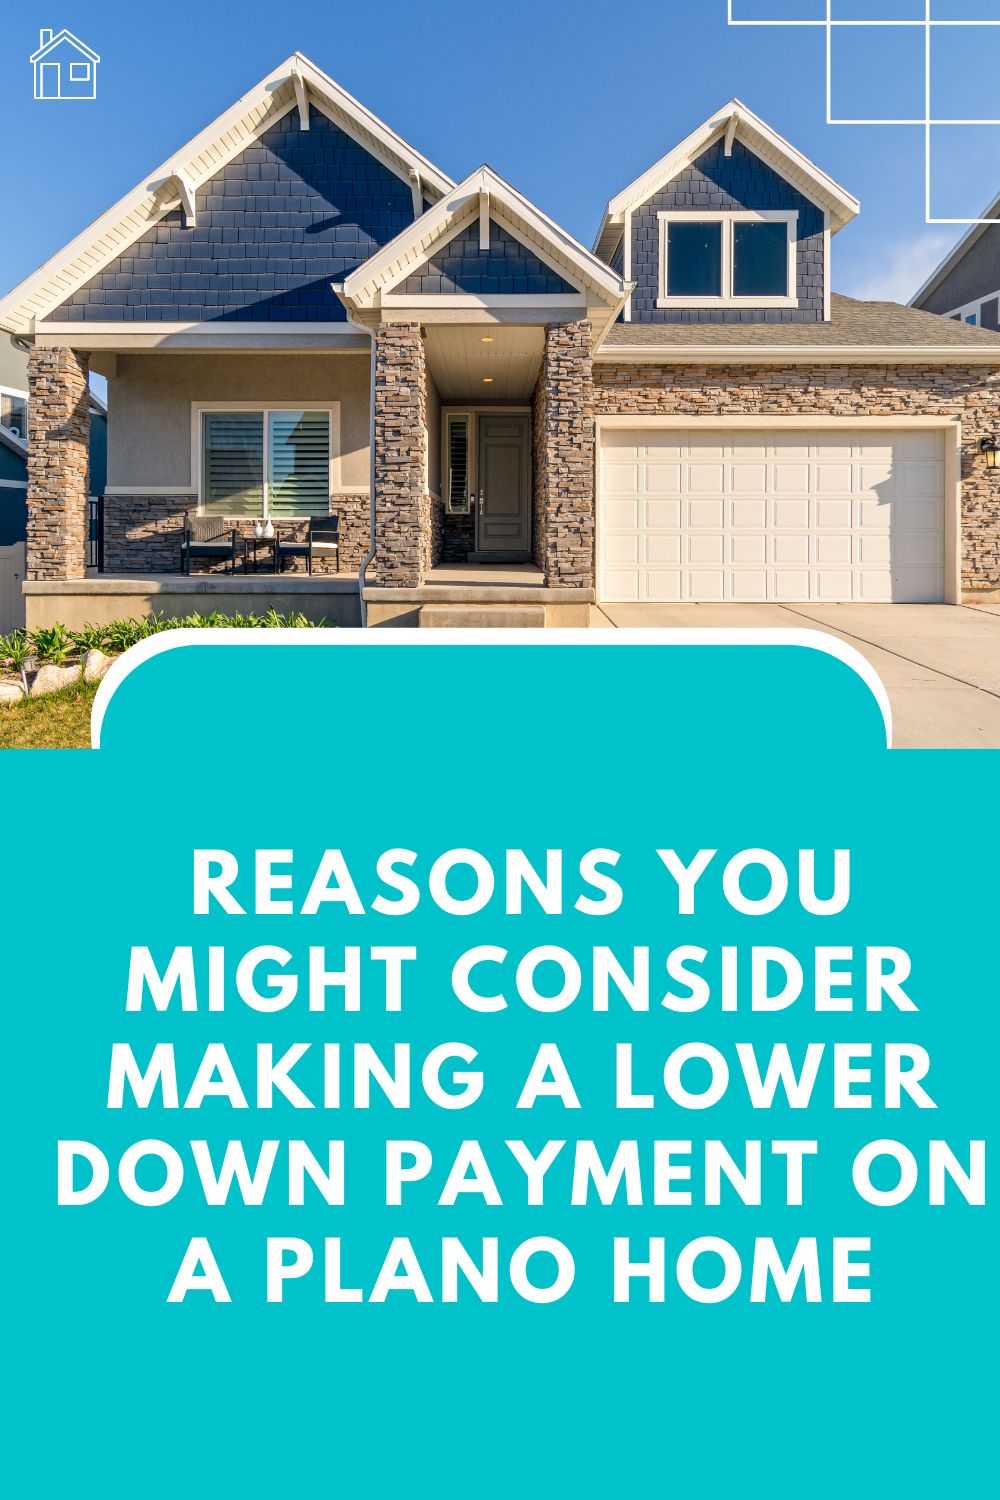 Reasons You Might Consider Making a Lower Down Payment on a Plano Home